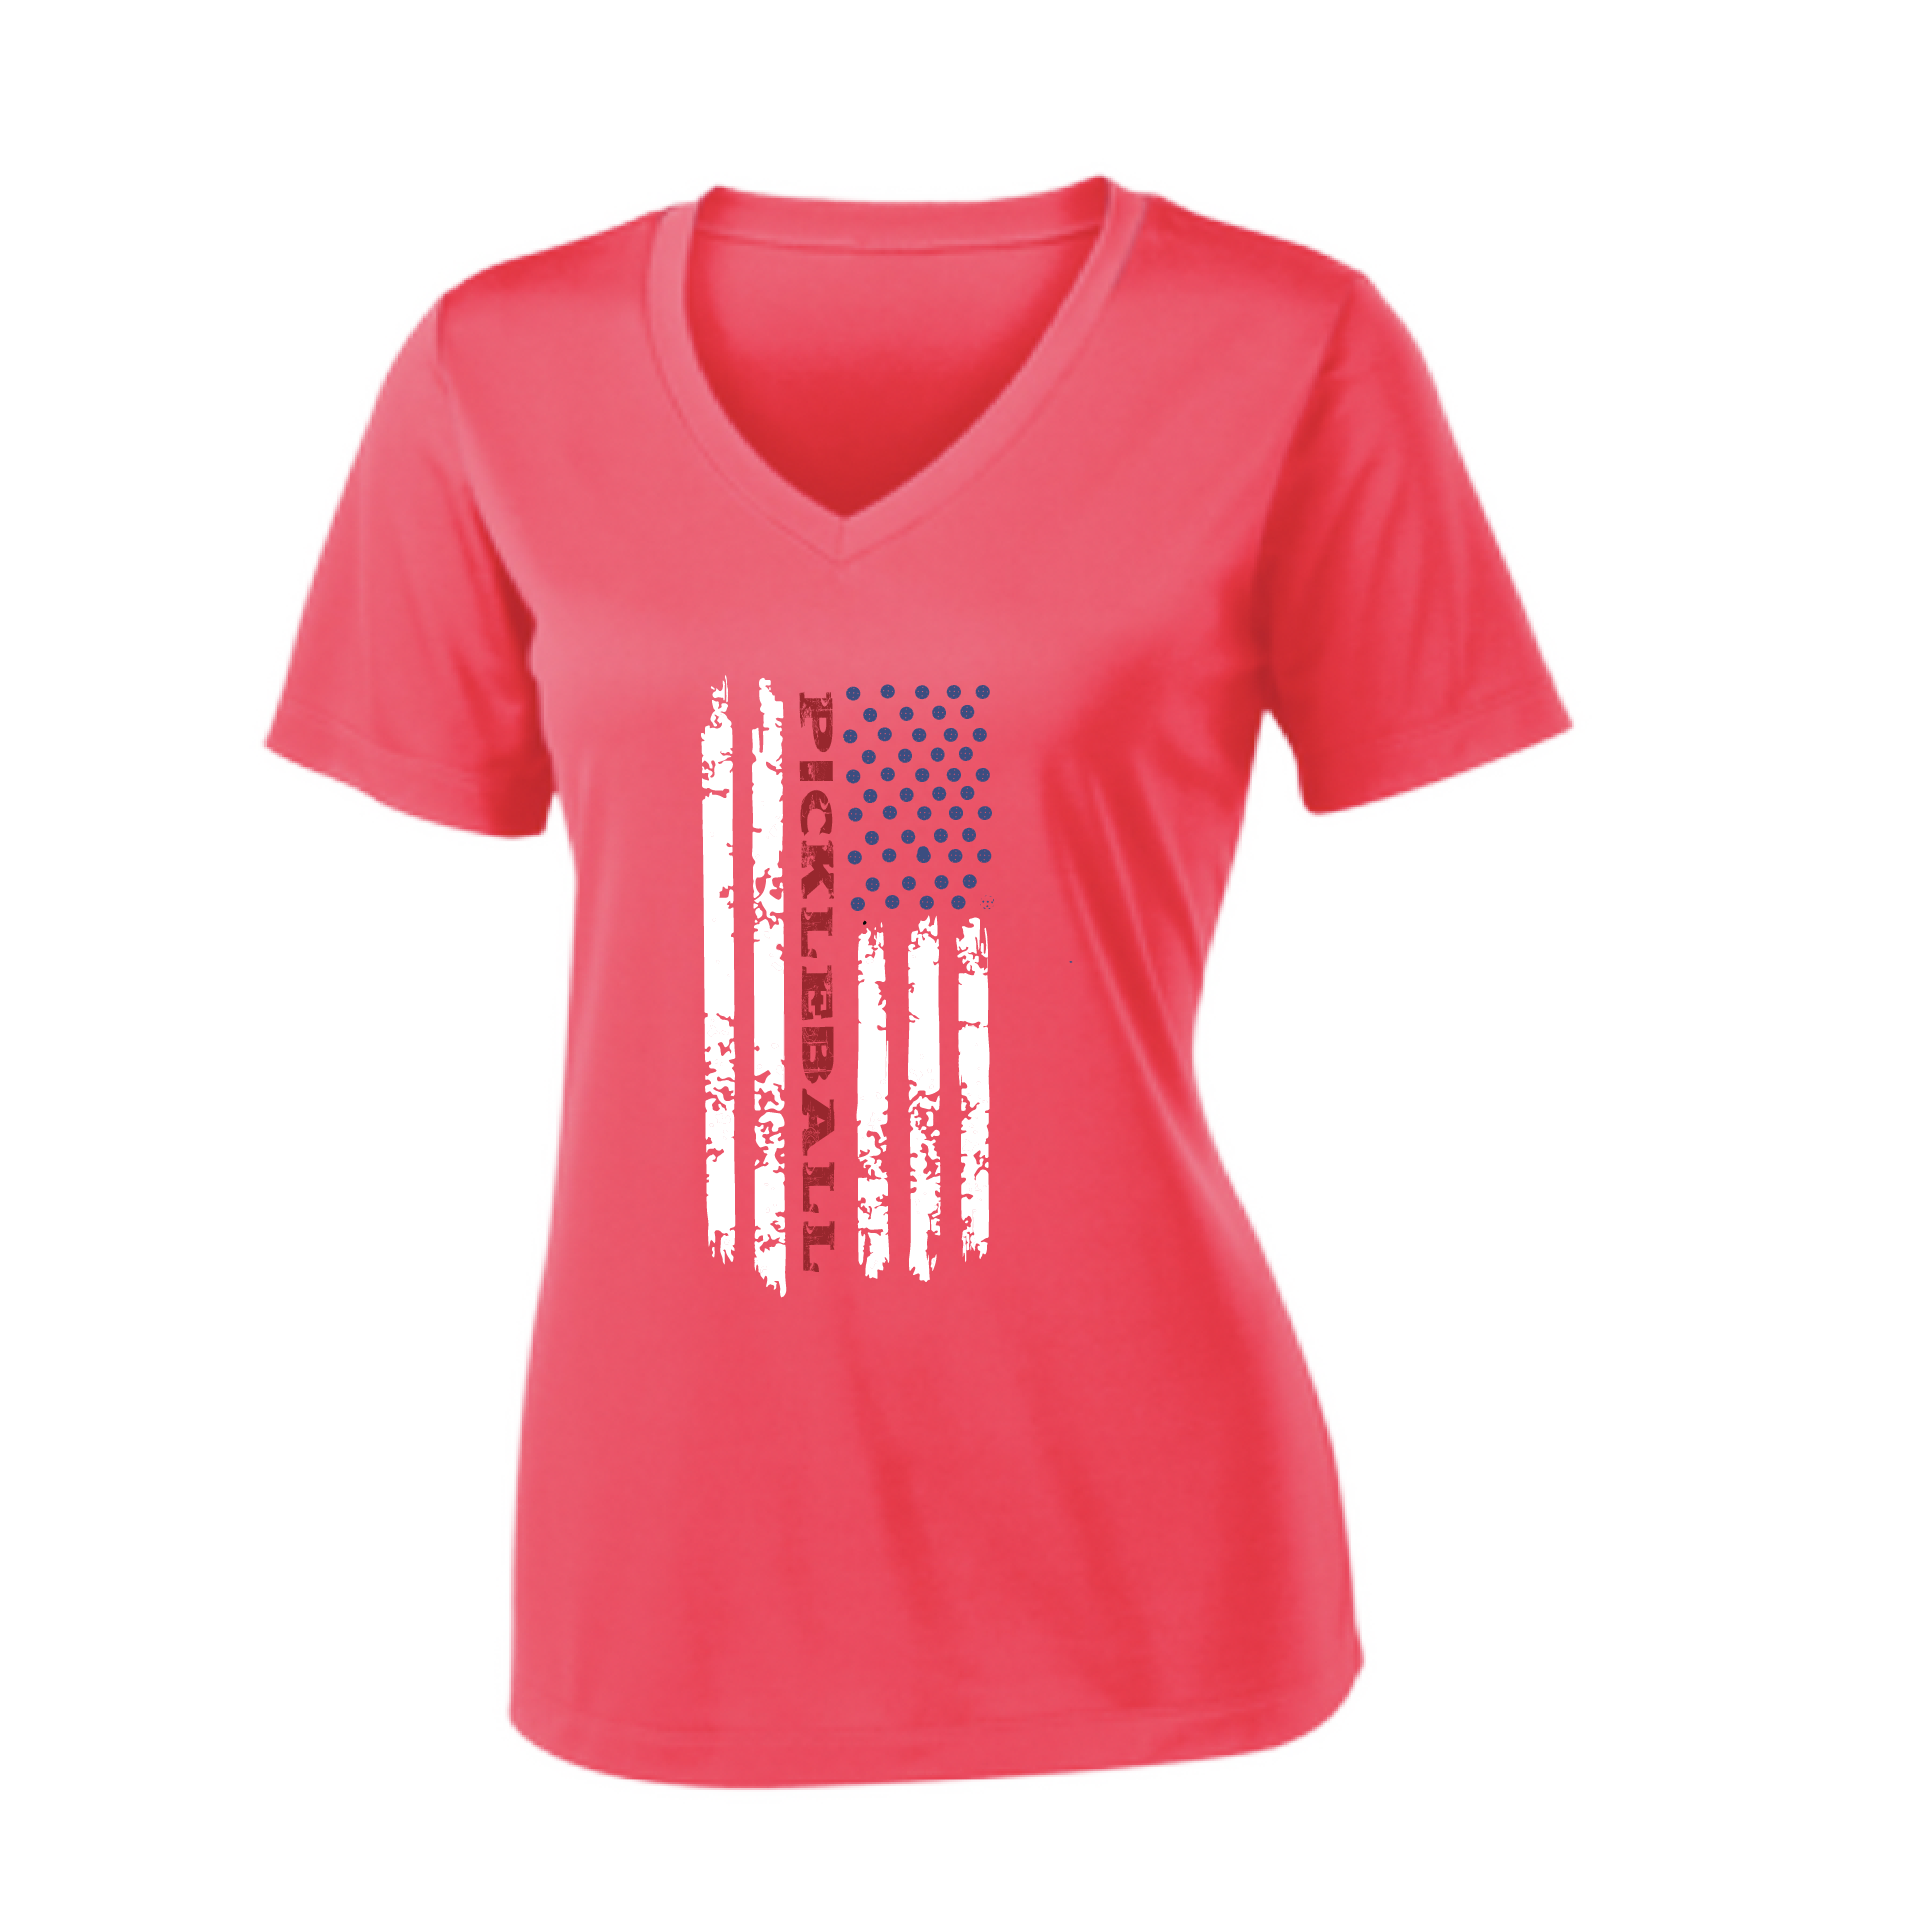 Pickleball Design: Pickleball Flag Vertical on Front or Back of Shirt  Women's Style: Short-Sleeve V-Neck  Turn up the volume in this Women's shirt with its perfect mix of softness and attitude. Material is ultra-comfortable with moisture wicking properties and tri-blend softness. PosiCharge technology locks in color. Highly breathable and lightweight.